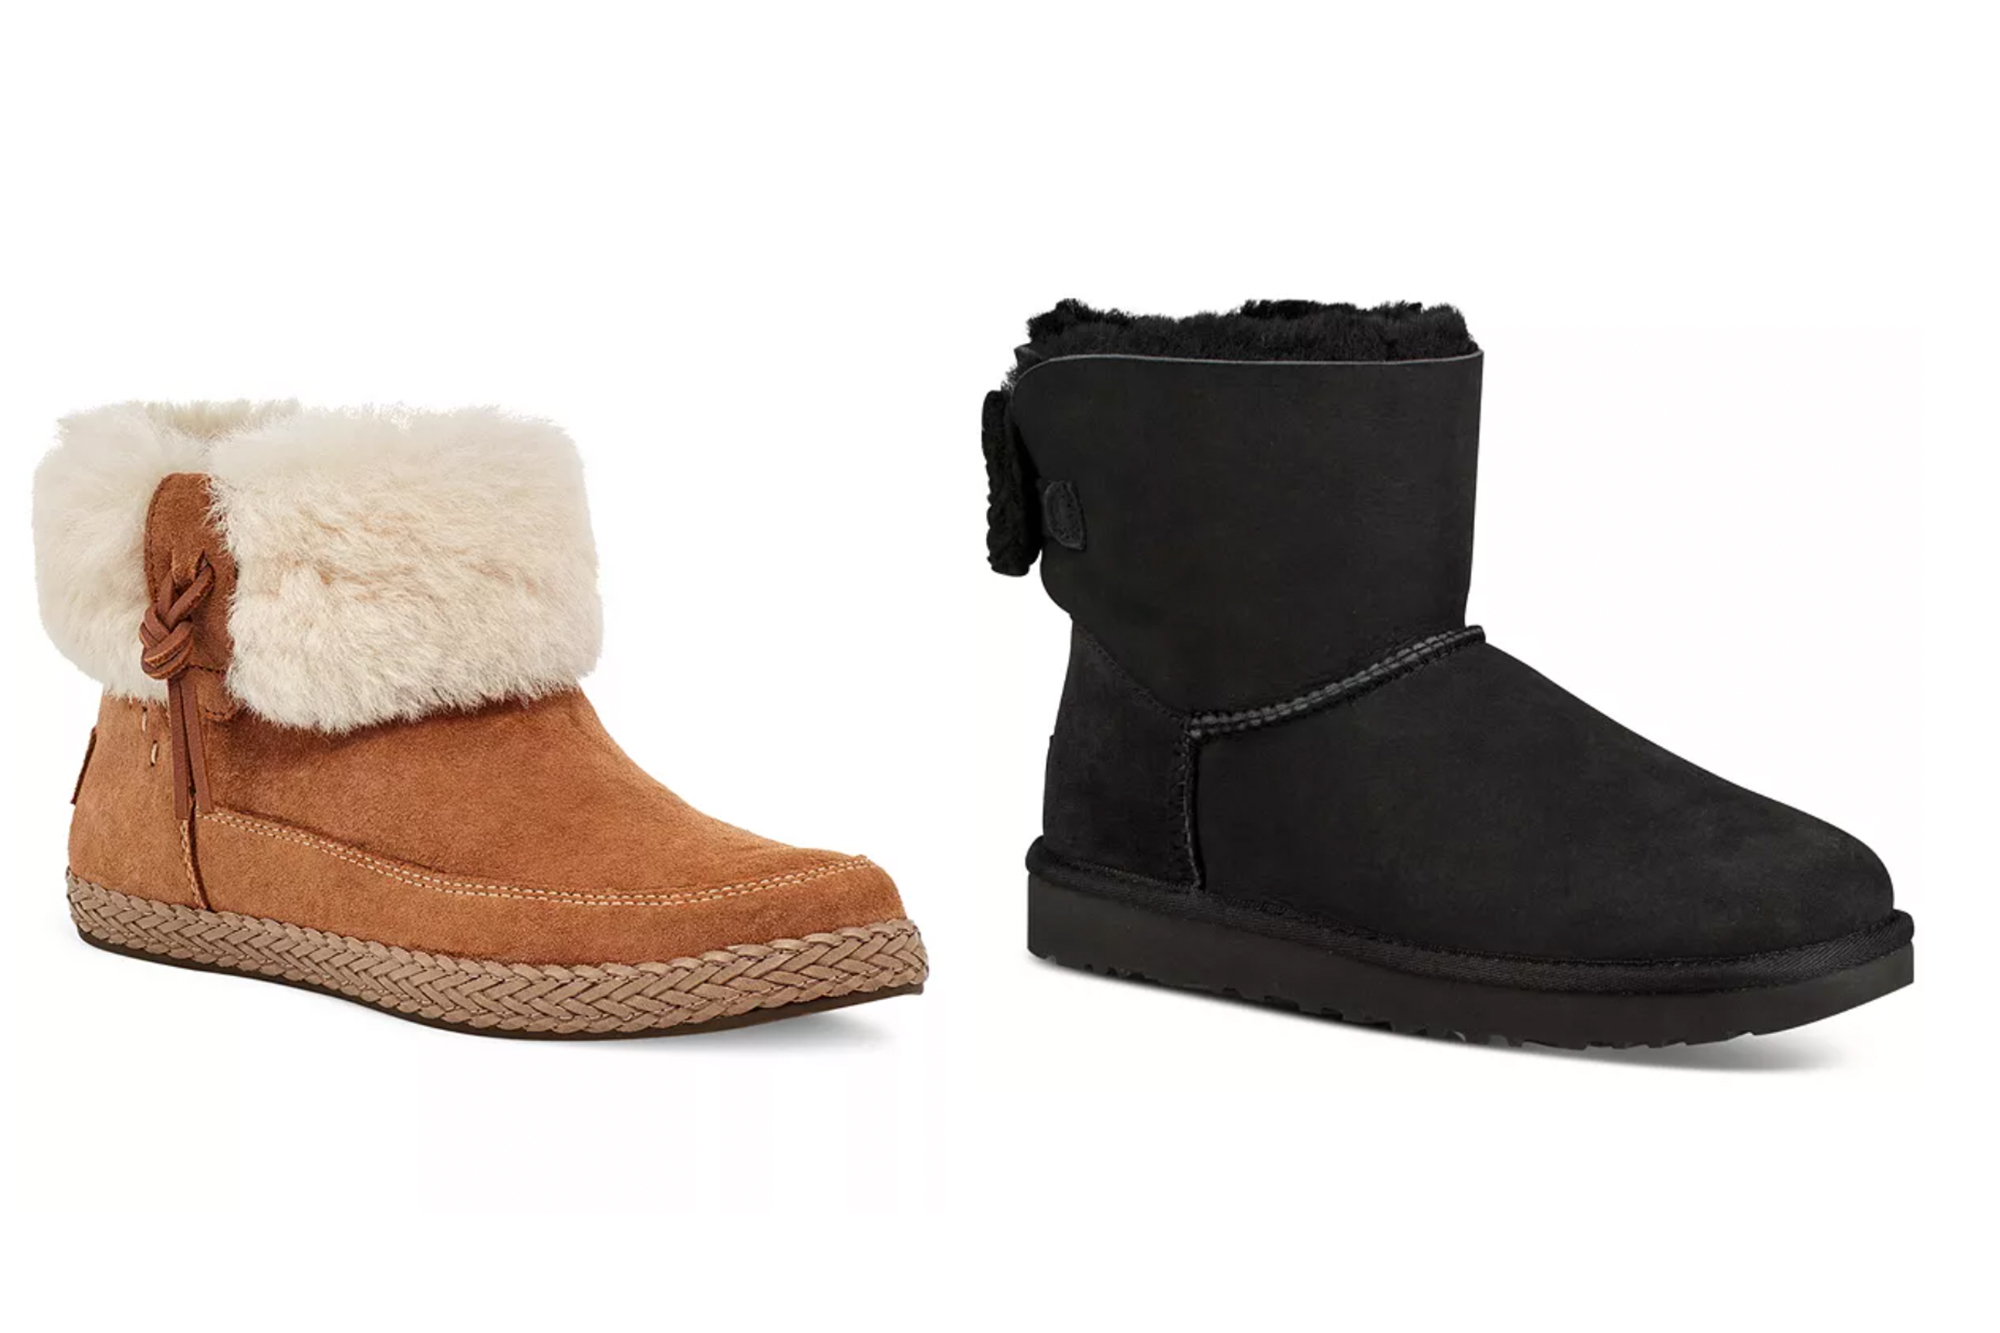 black and tan uggs